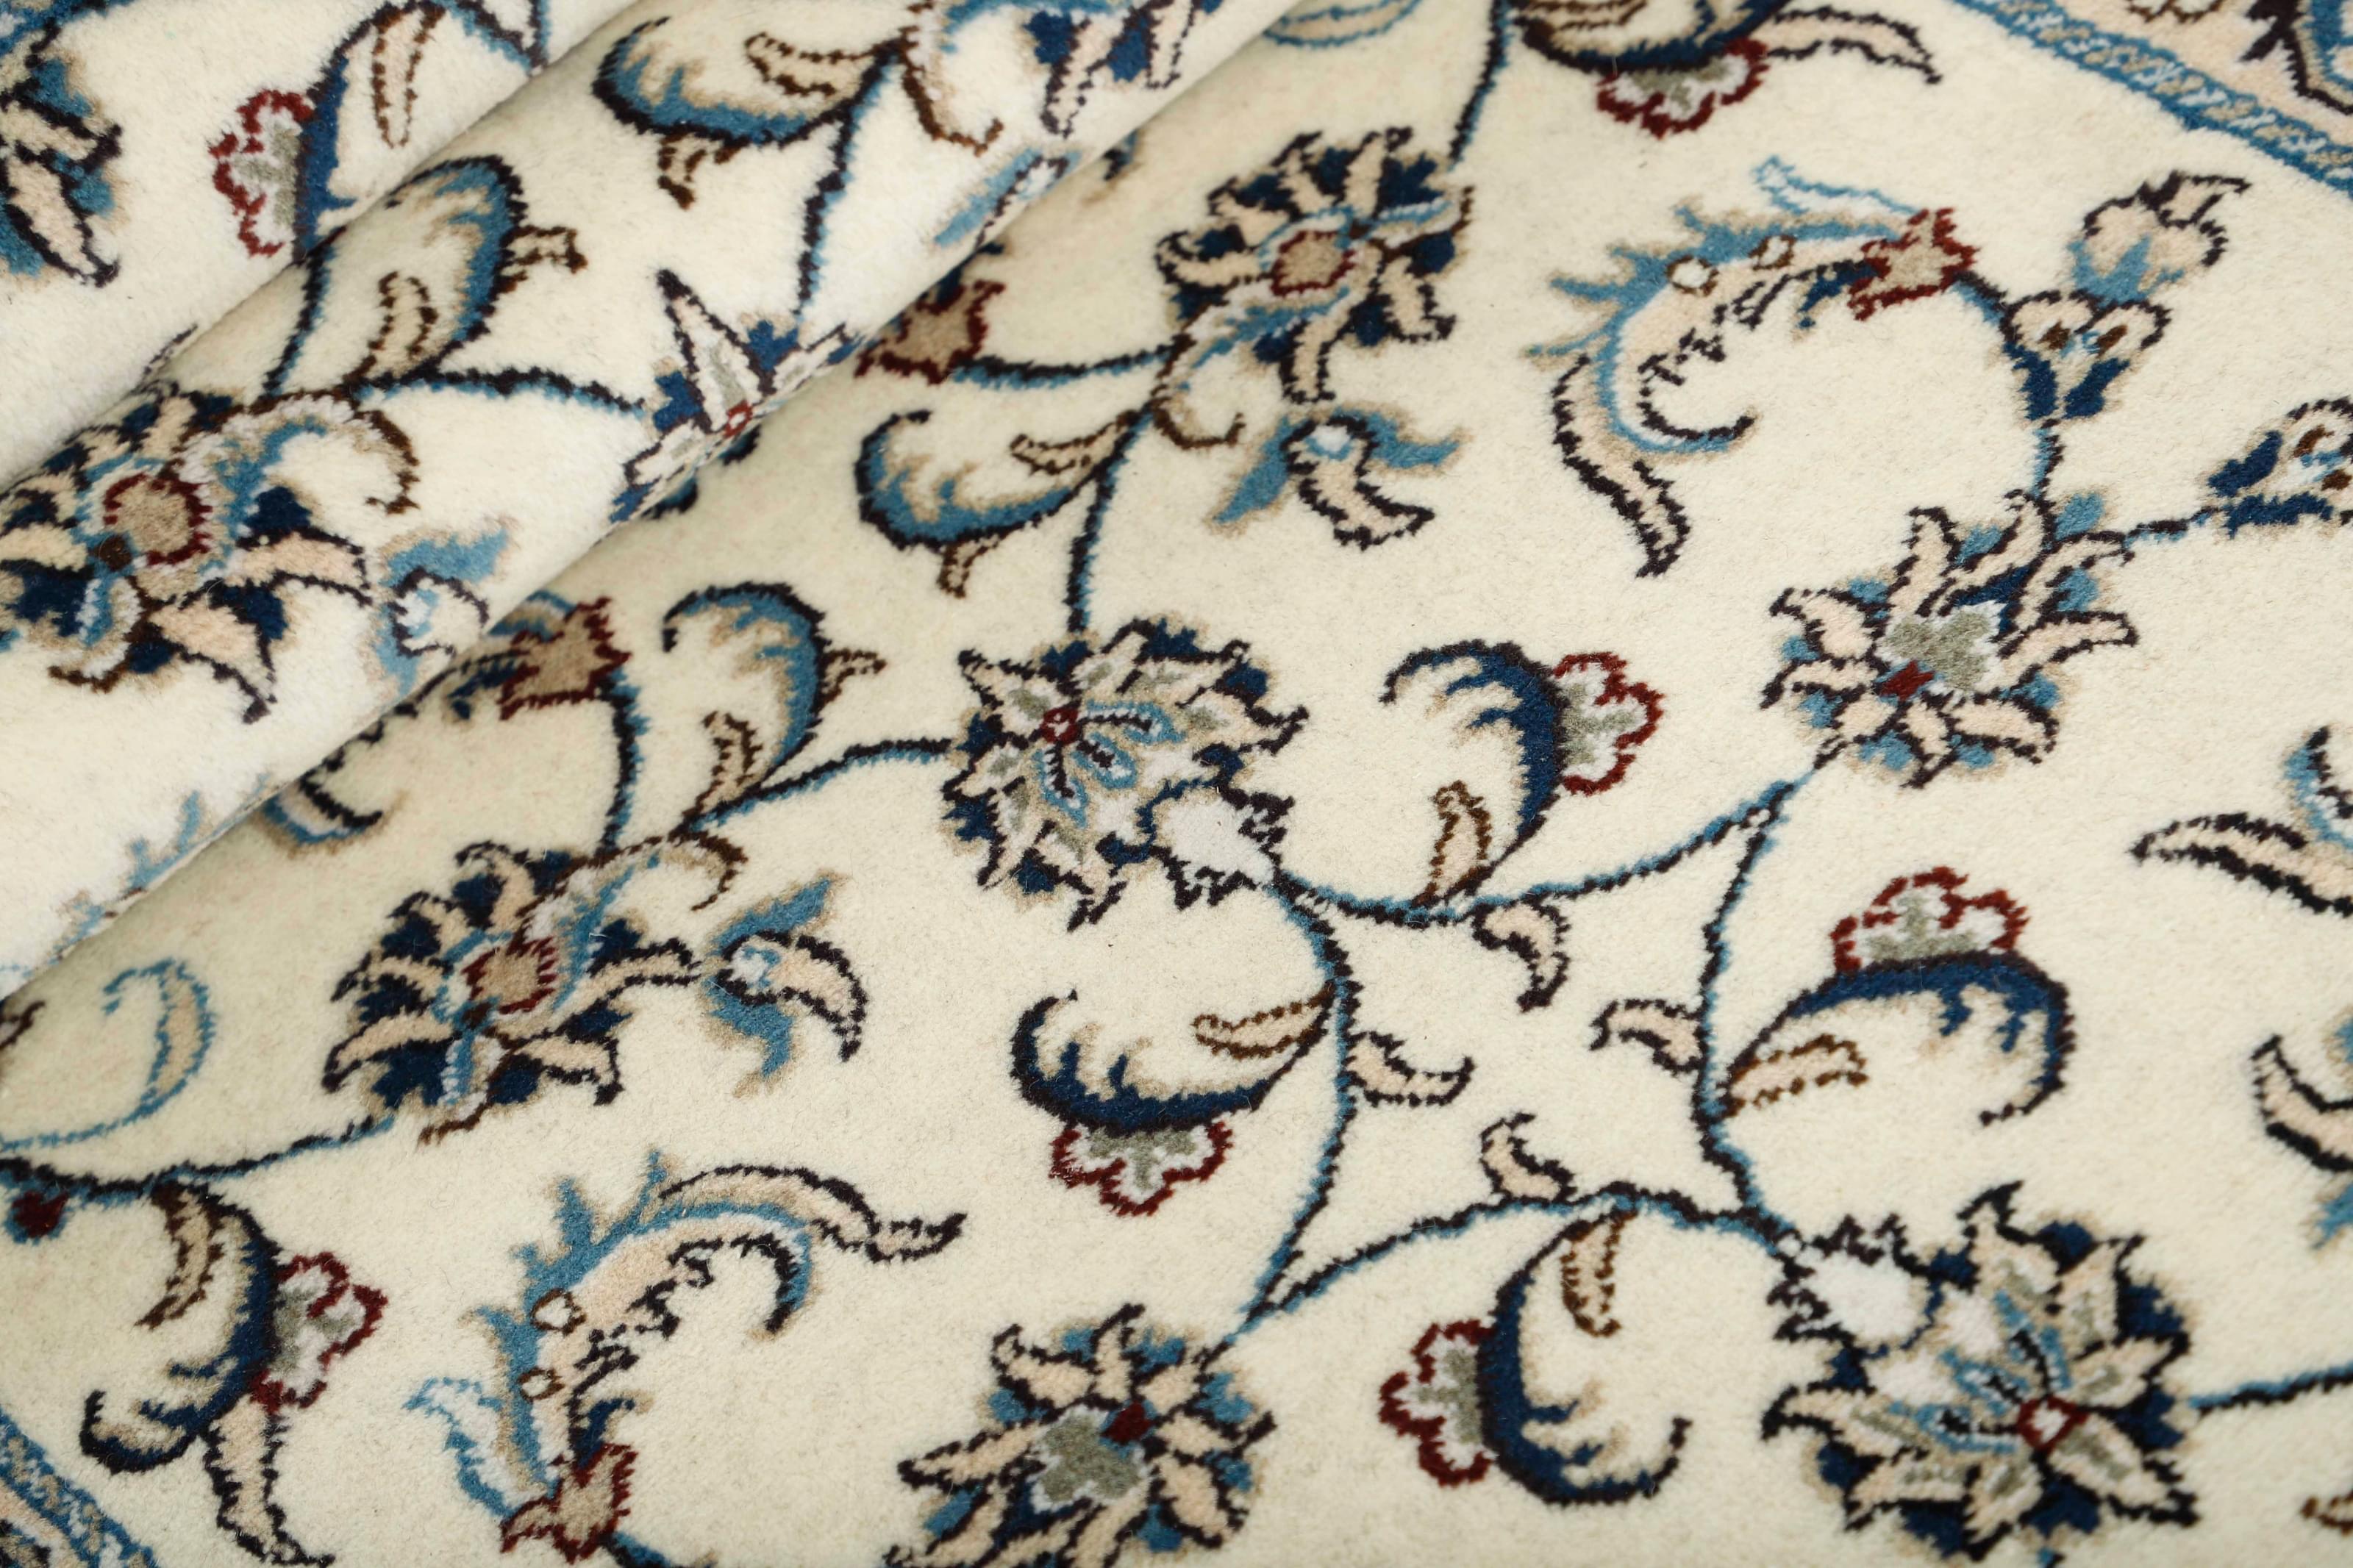  blue and brown floral design